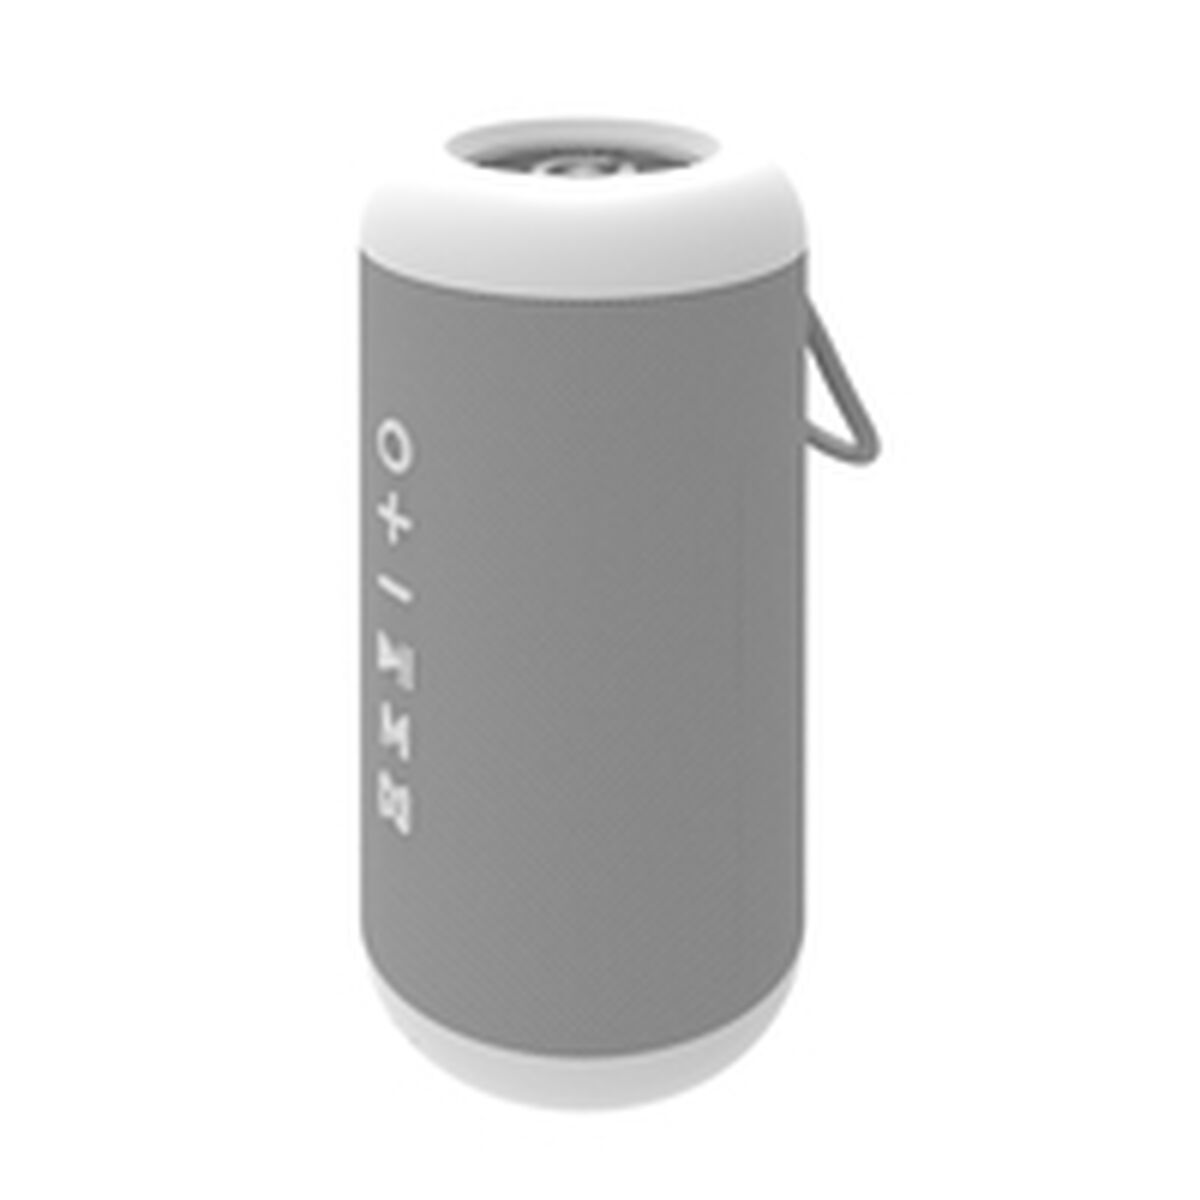 Portable Bluetooth Speakers Celly ULTRABOOSTWH White, Celly, Electronics, Mobile communication and accessories, portable-bluetooth-speakers-celly-ultraboostwh-white, Brand_Celly, category-reference-2609, category-reference-2882, category-reference-2923, category-reference-t-19653, category-reference-t-21311, category-reference-t-4036, category-reference-t-4037, Condition_NEW, entertainment, music, Price_20 - 50, telephones & tablets, wifi y bluetooth, RiotNook